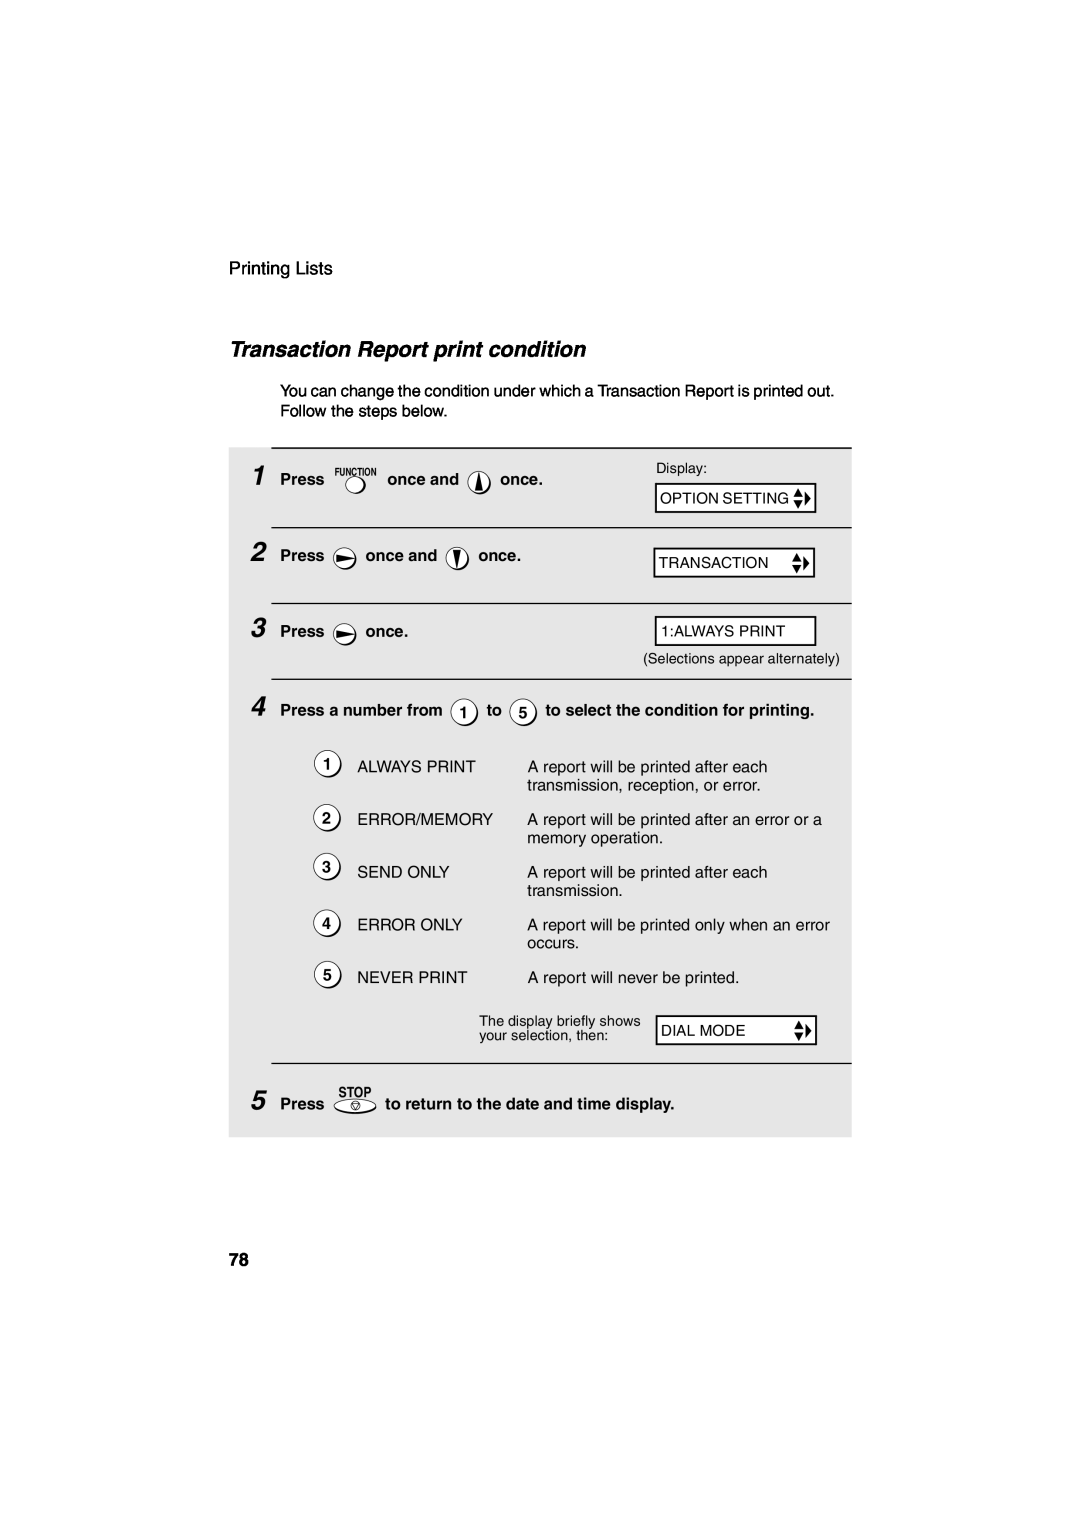 Sharp UX-A260 manual Transaction Report print condition, Printing Lists 